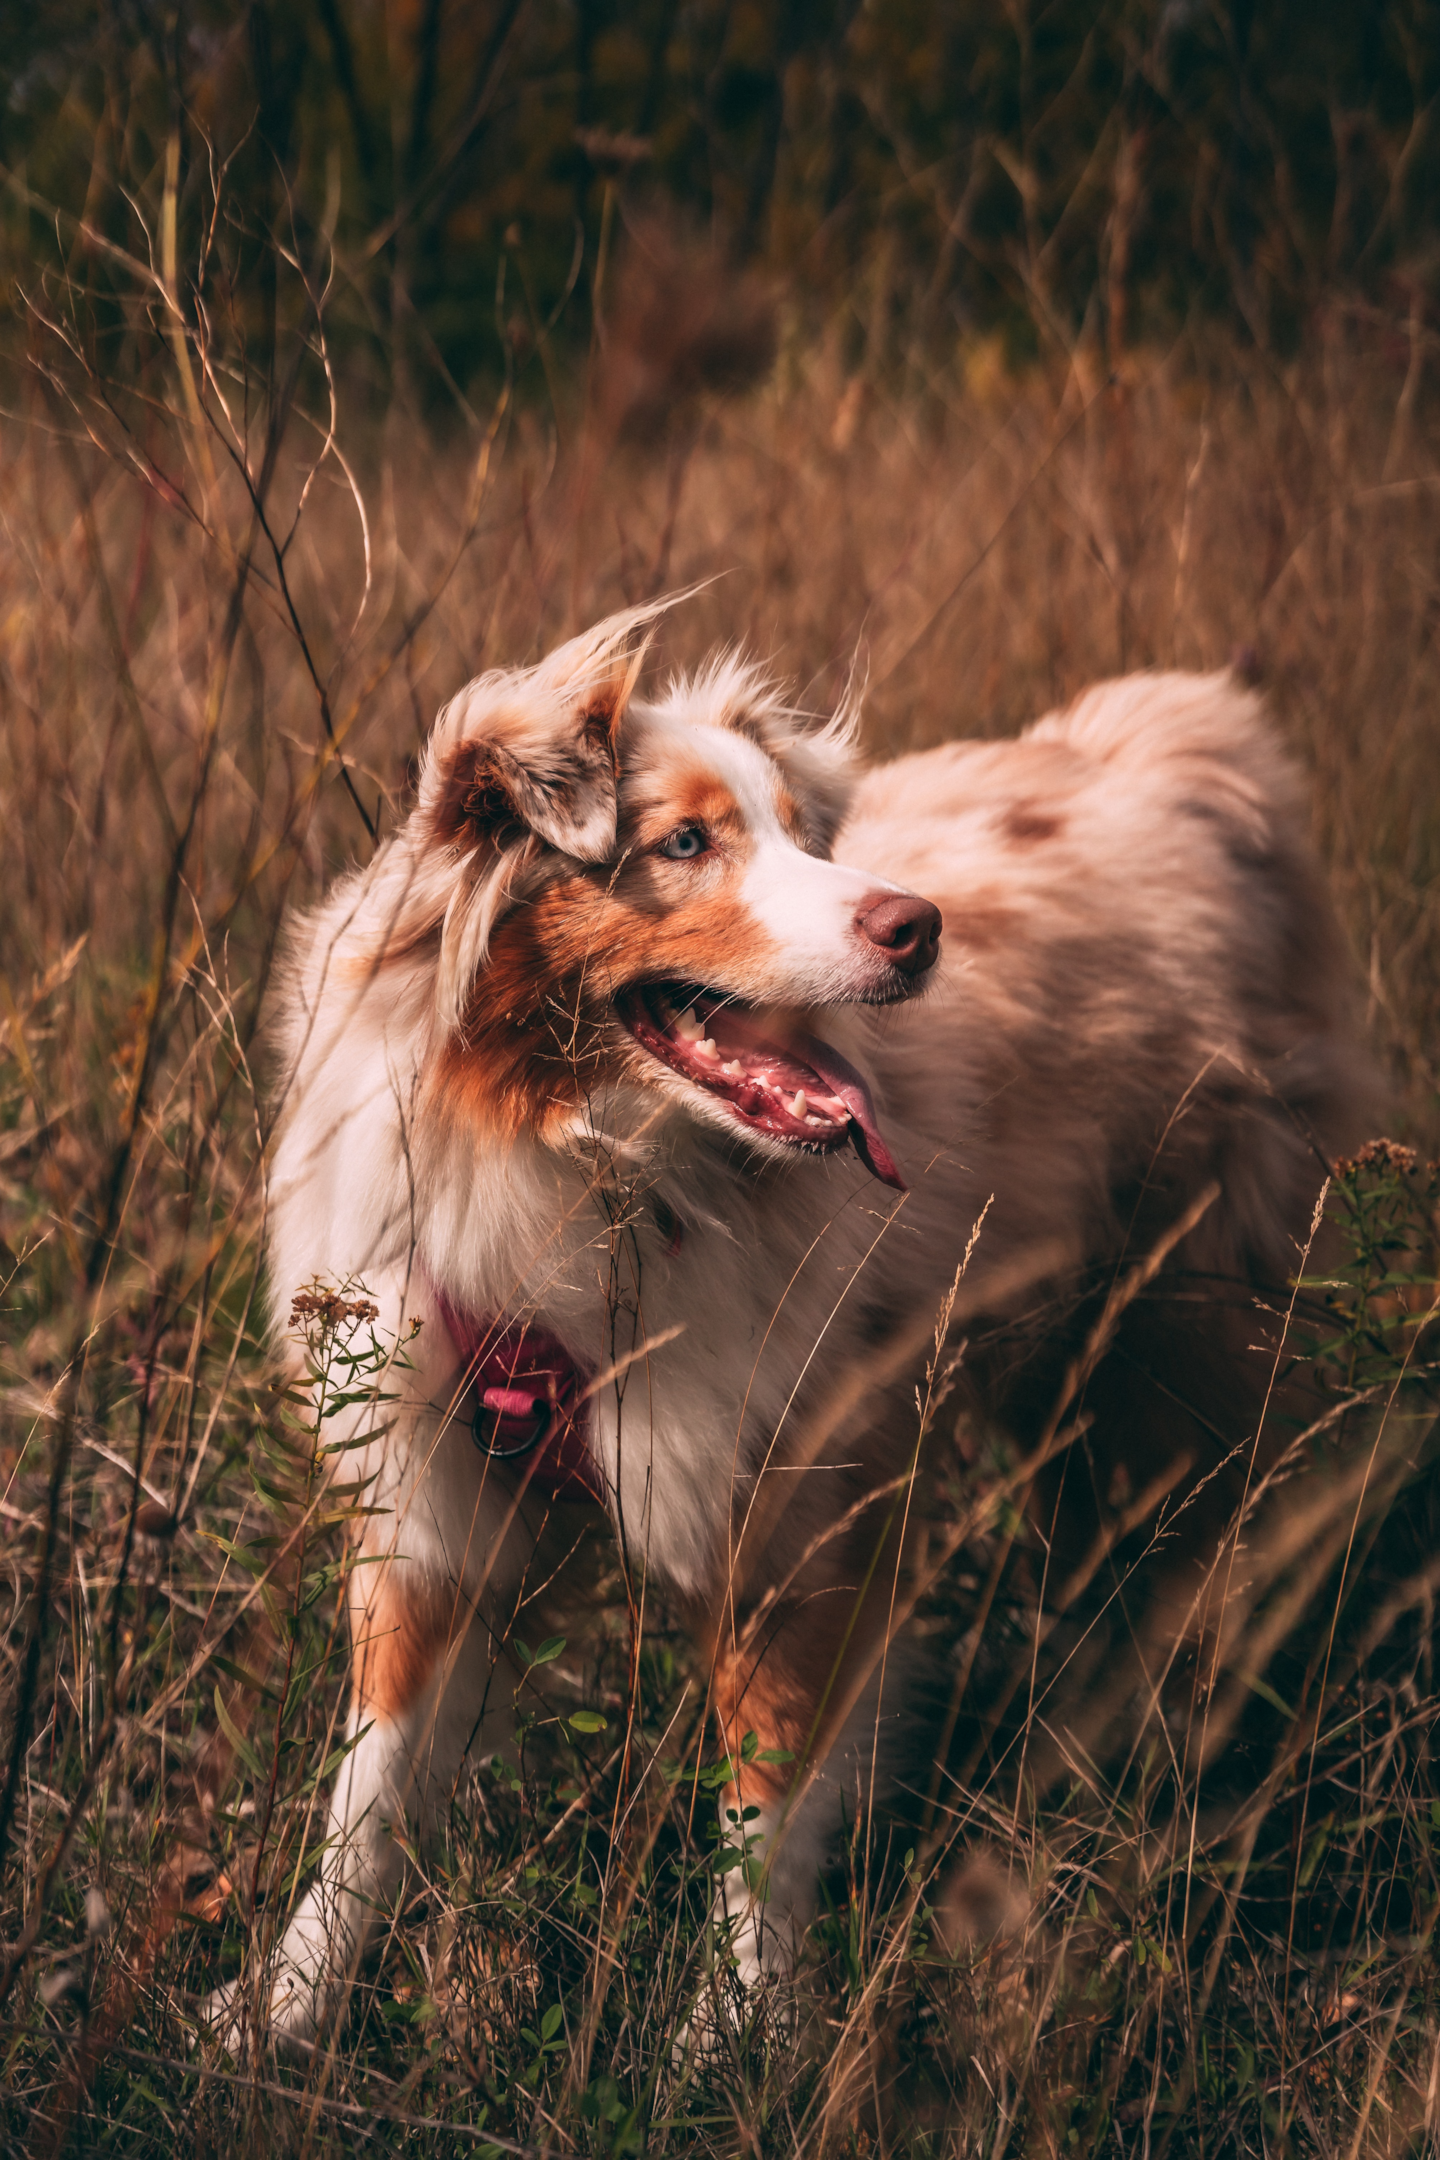 Companion Animals, Such as This One, are Important Considerations in a Divorce Case. The Other Spouse May Want Custody of the Dog, but a Good Family Law Attorney Can Help you Keep Your Companion Animals